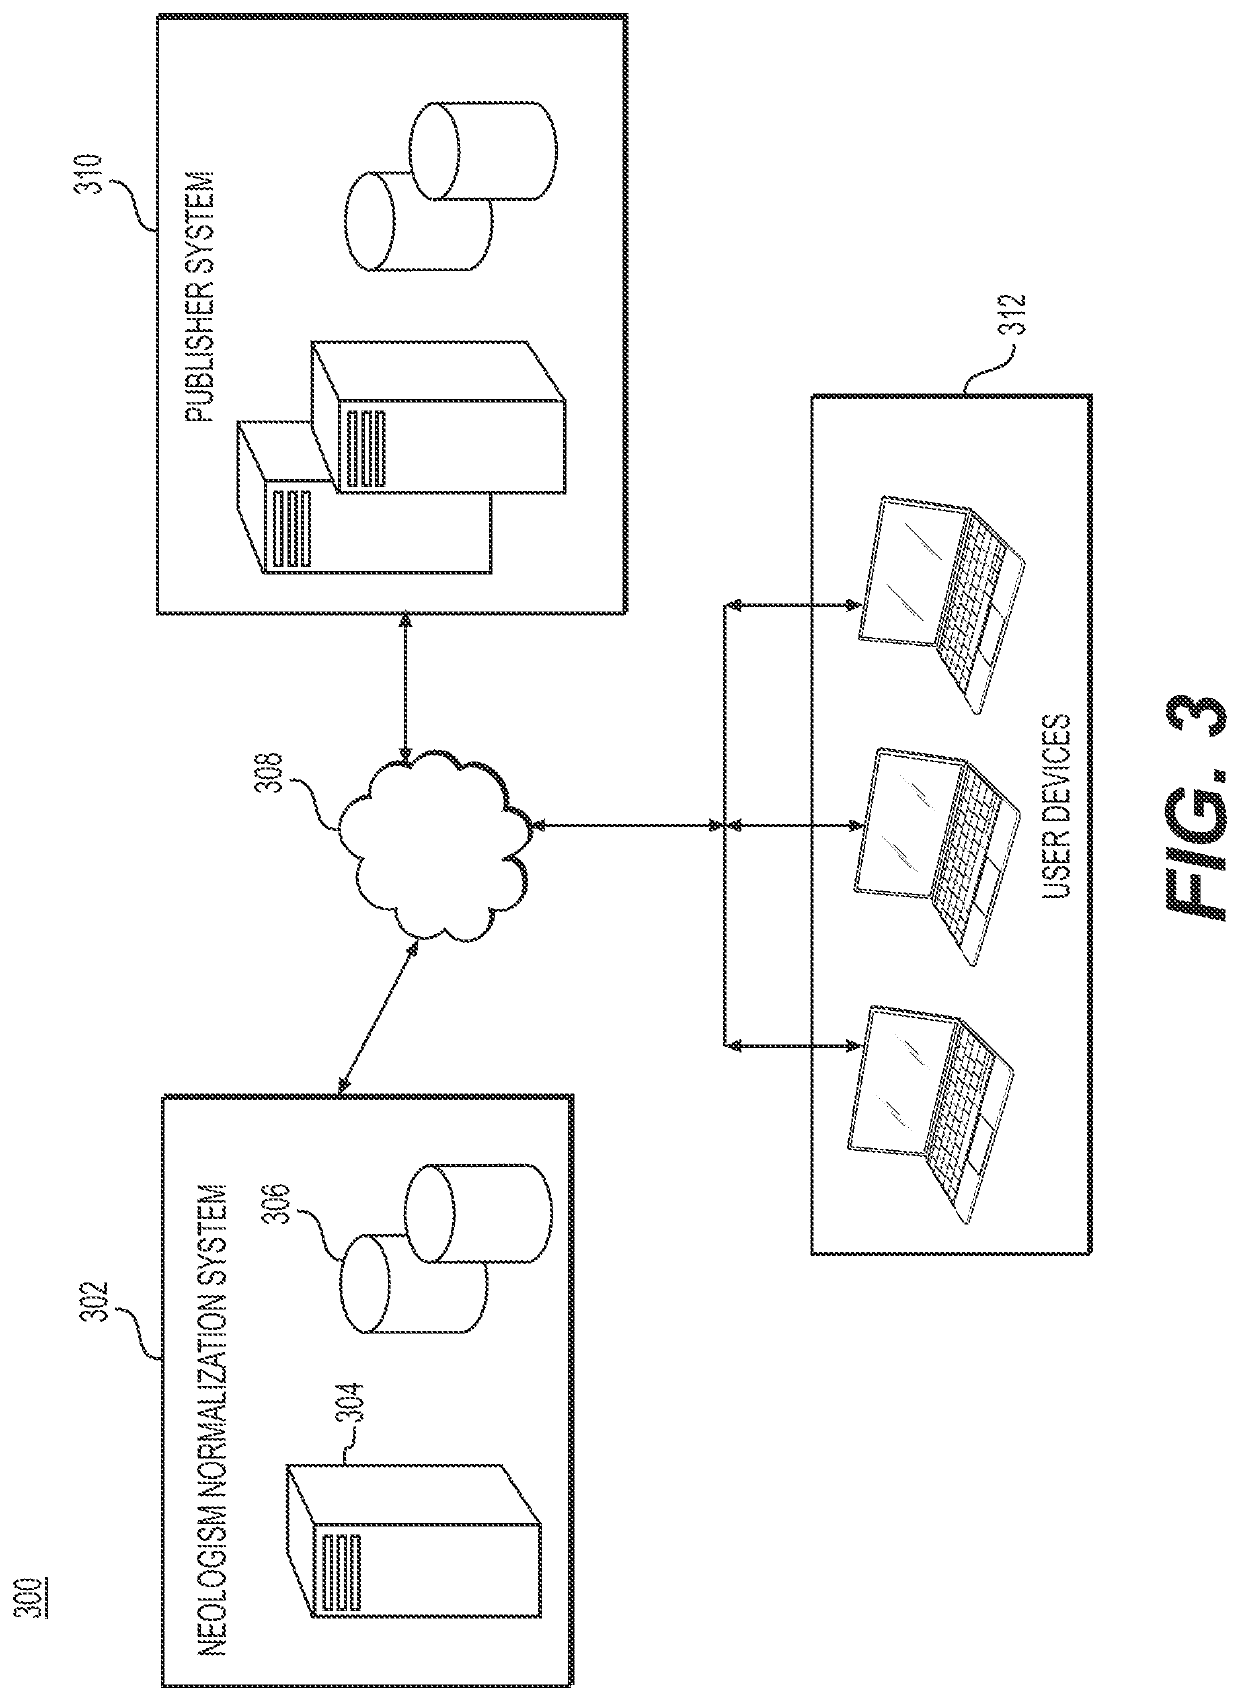 Systems and methods for unsupervised neologism normalization of electronic content using embedding space mapping